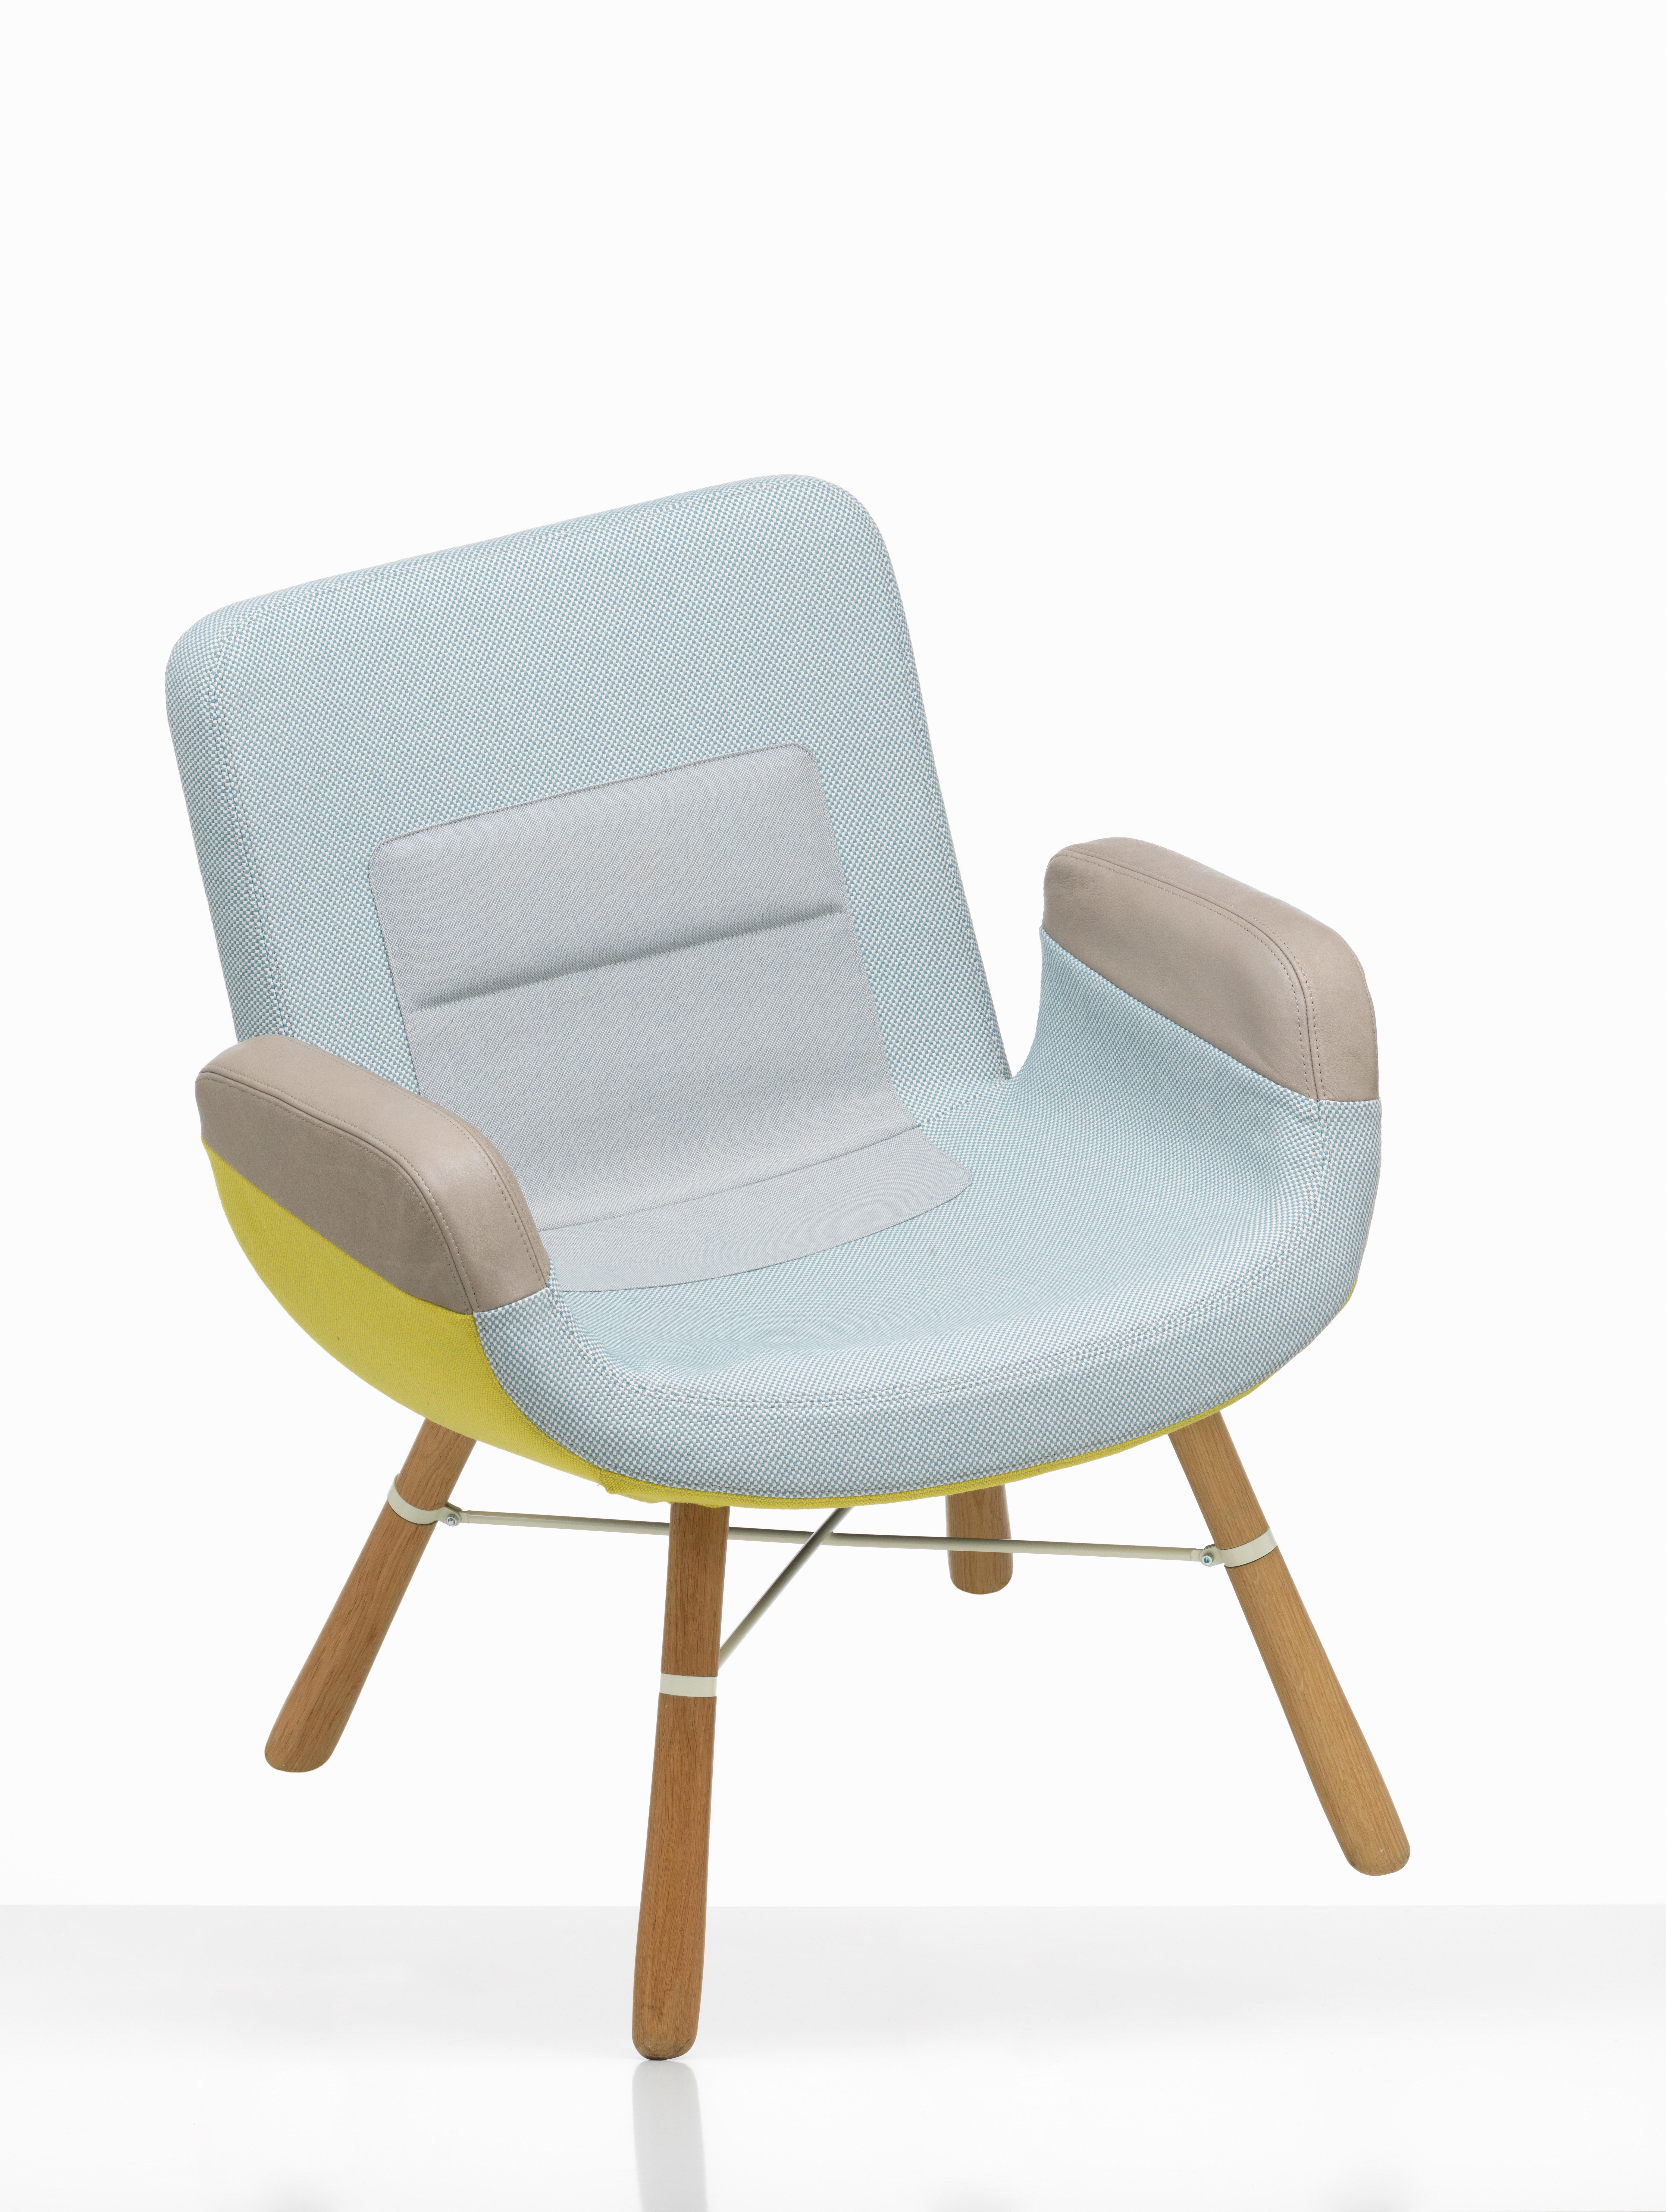 Swiss Vitra East River Chair in Light Combo Fabric with Oak Legs by Hella Jongerius For Sale